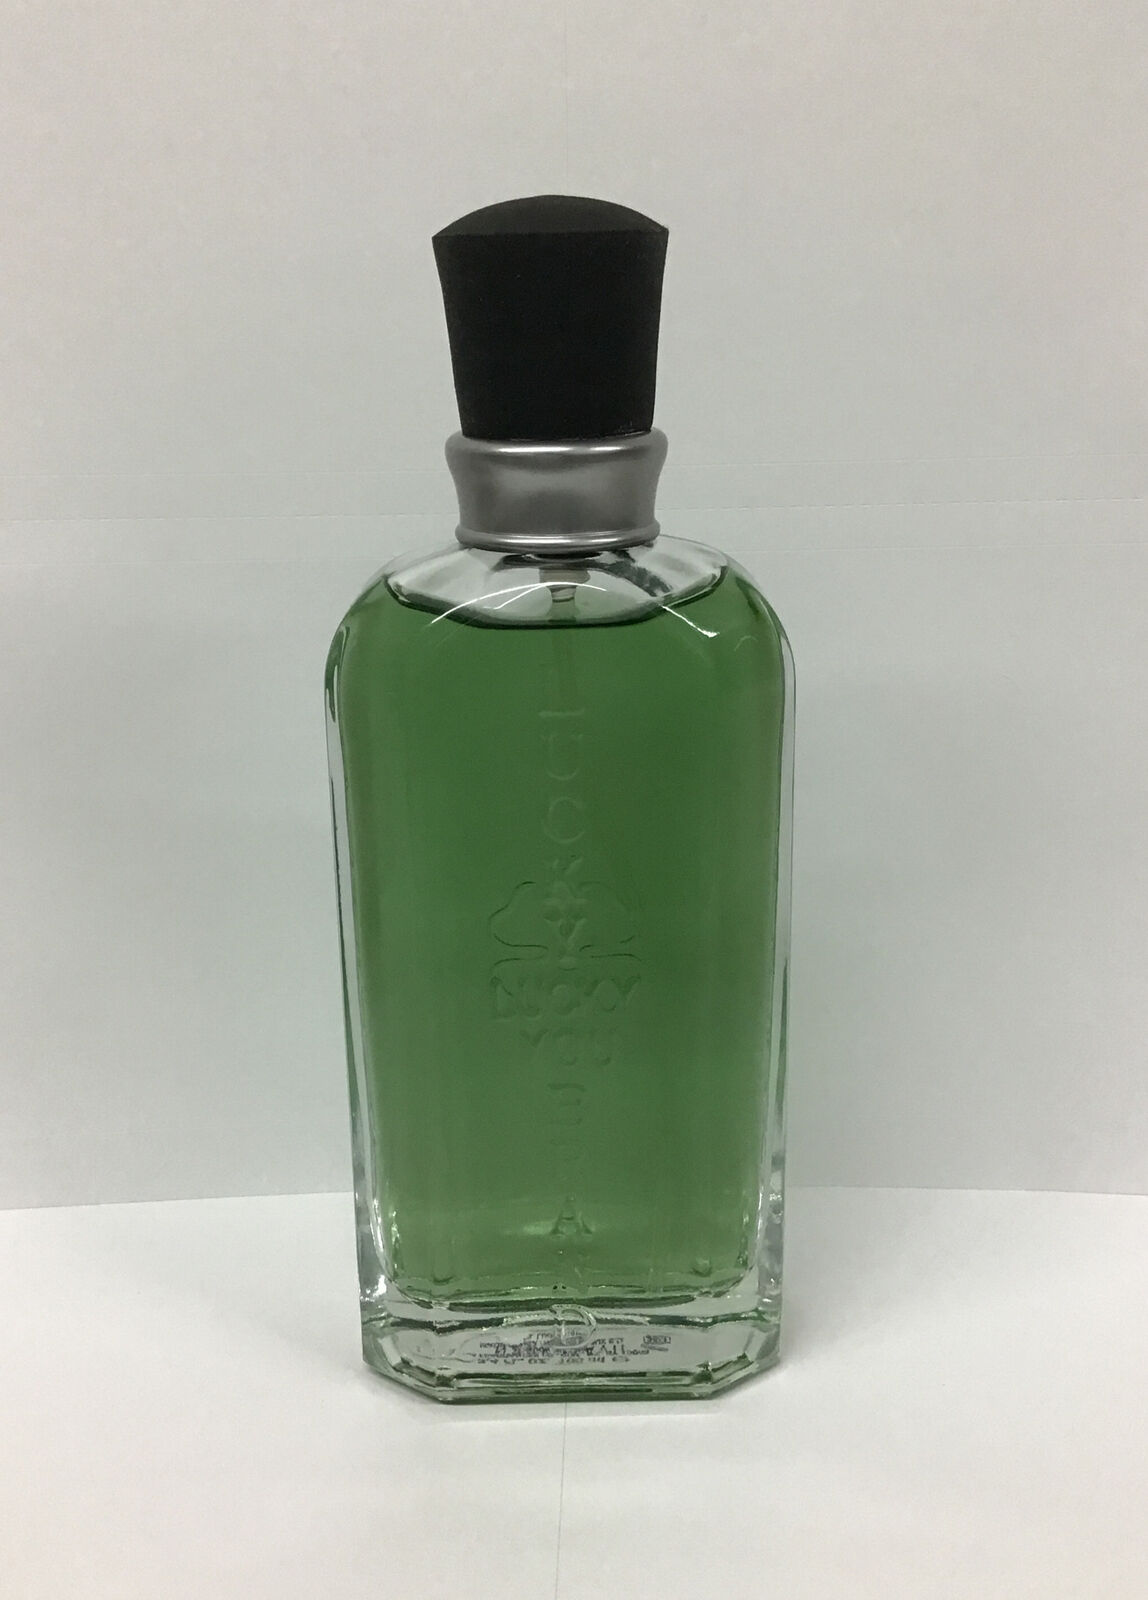 Lucky Brand Lucky you Cologne Spray 3.4 Fl Oz / 100 Ml, As Pictured.